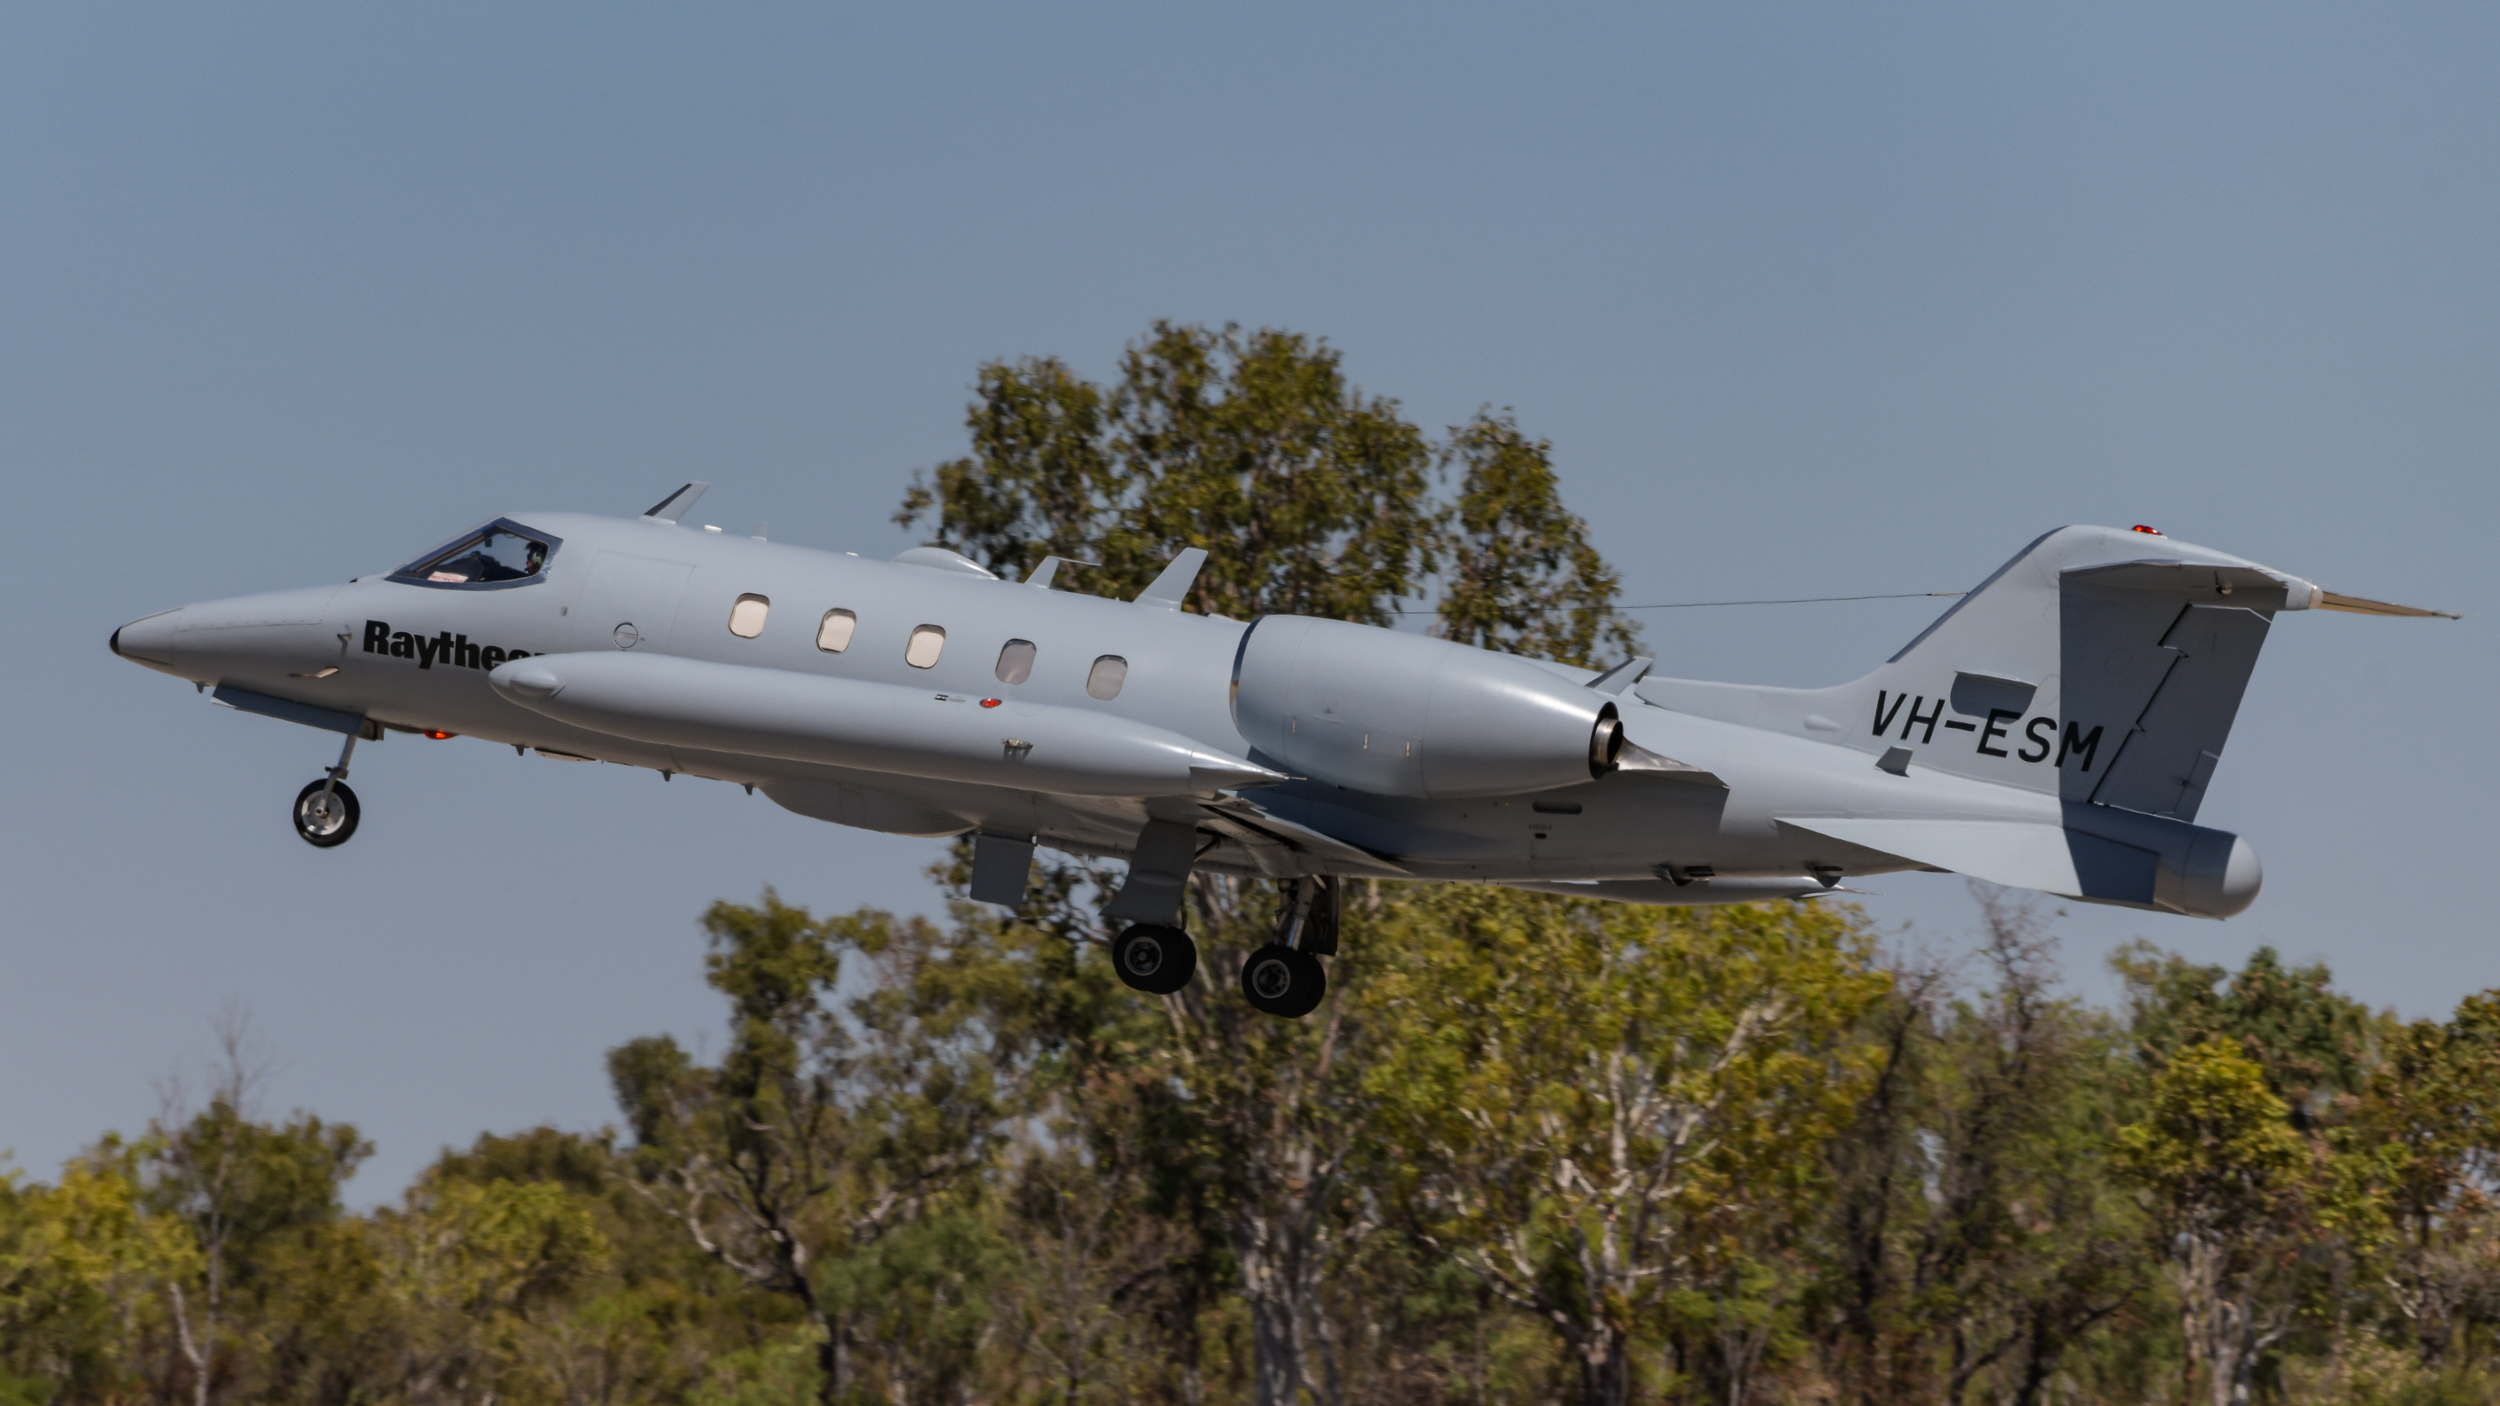 Raytheon Australia-operated Learjet 35A VH-ESM, which is used for electronic warfare training, departs Tindal. (Mark Jessop)